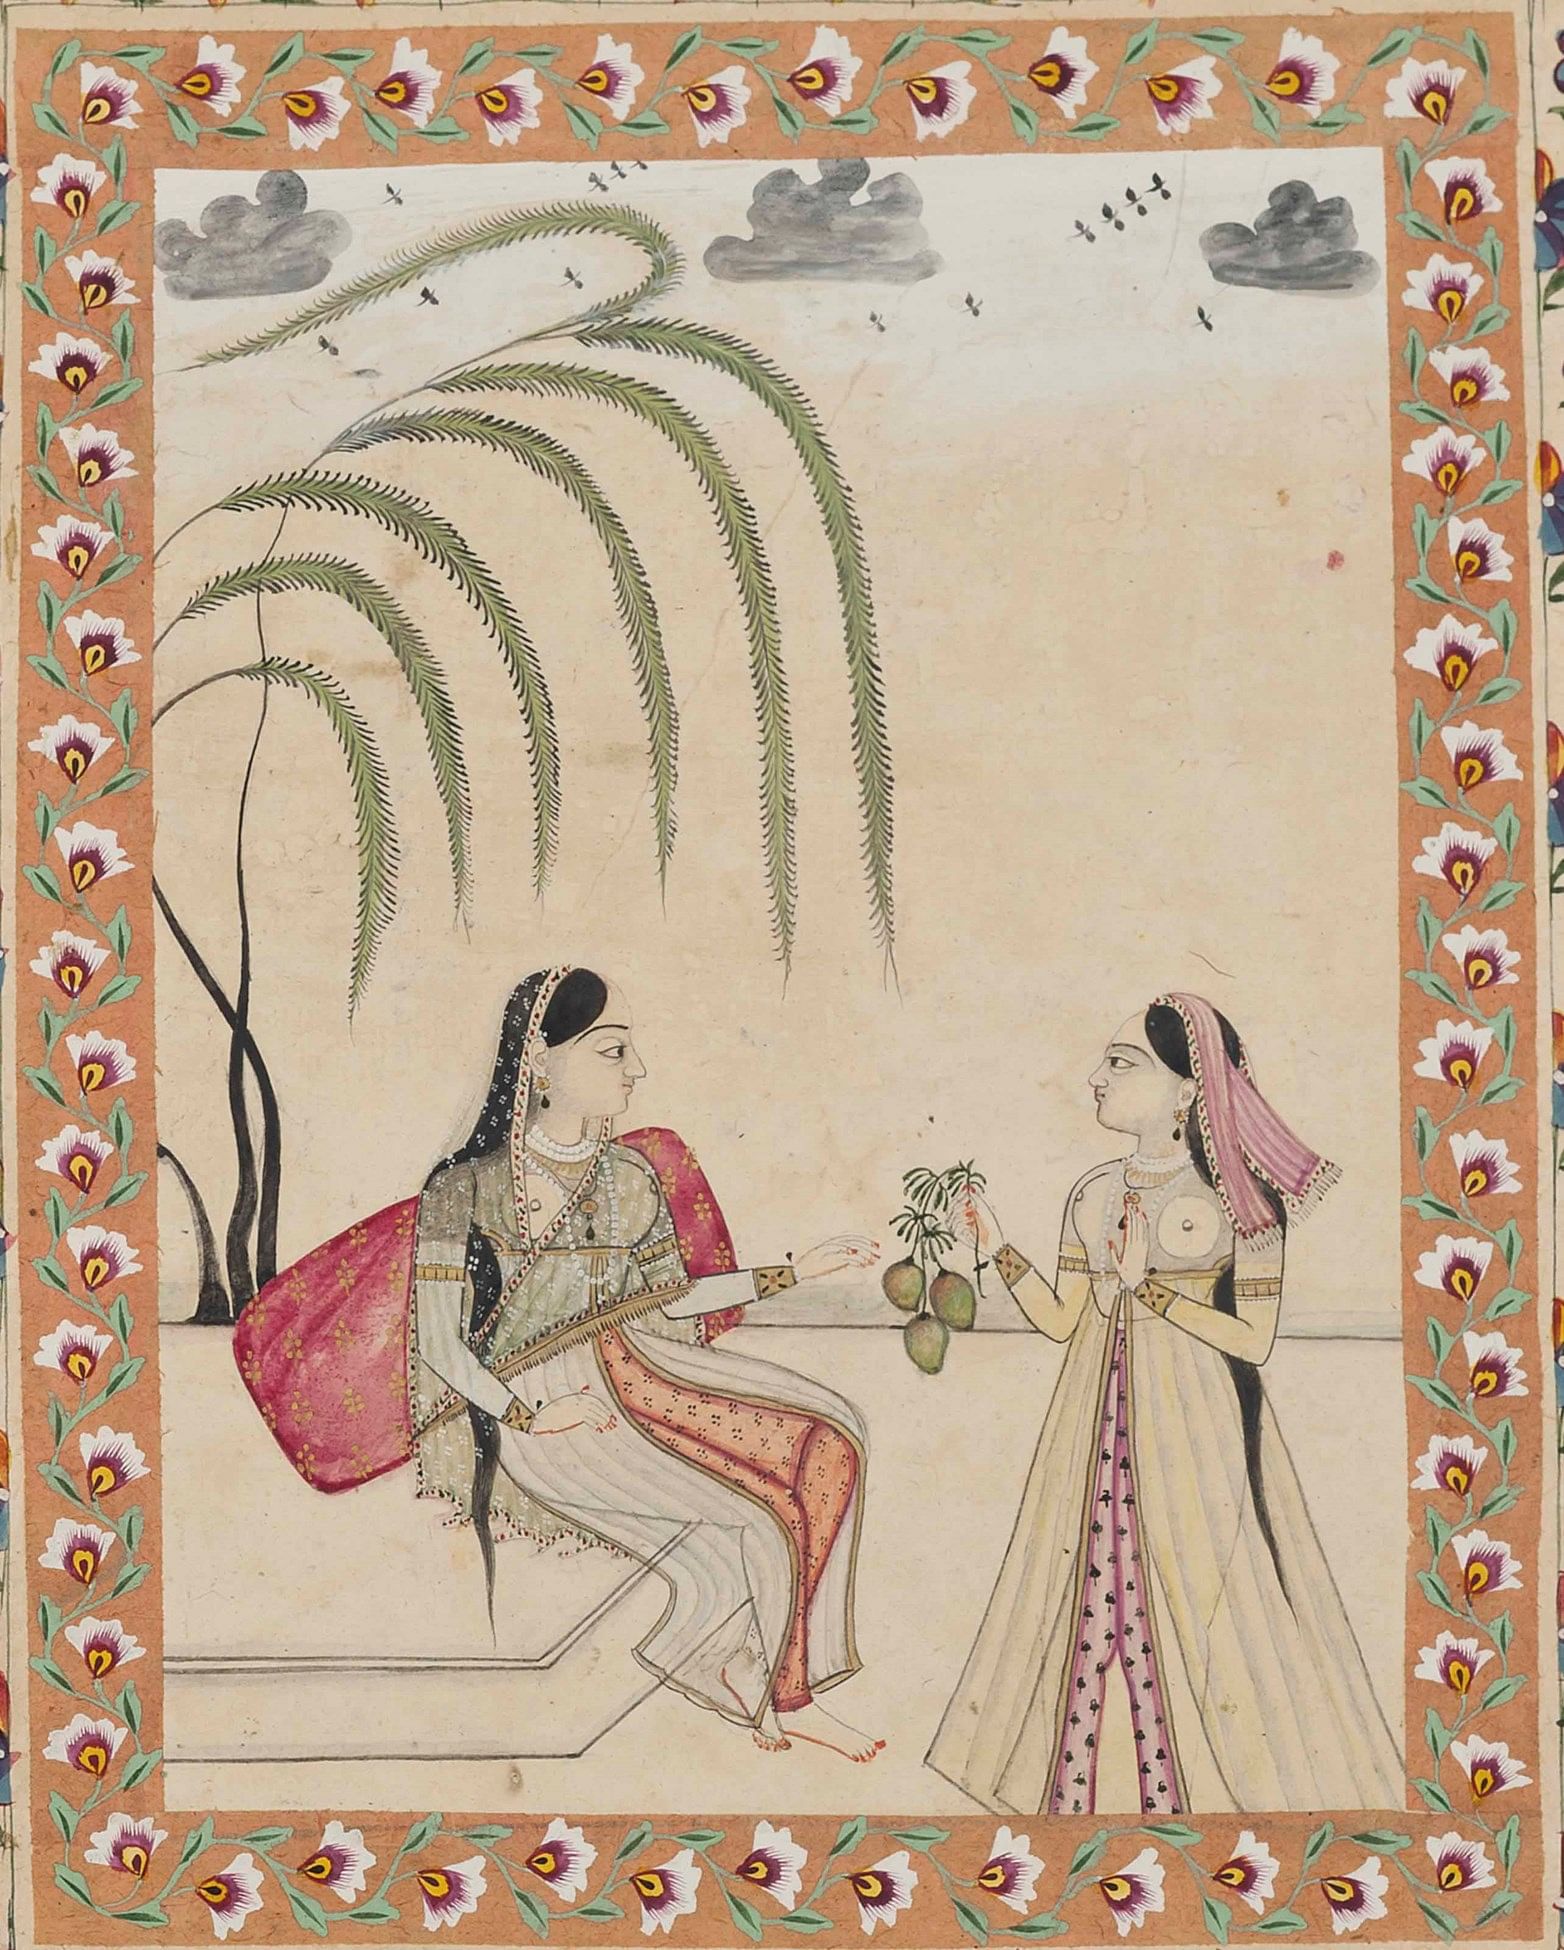 Two Ladies Sharing Mangoes, Kulu, PunjabHills, c. 1800, Opaque pigments heightened with gold on paper, 19.6 × 14.3cm, Image courtesy of Christie's.